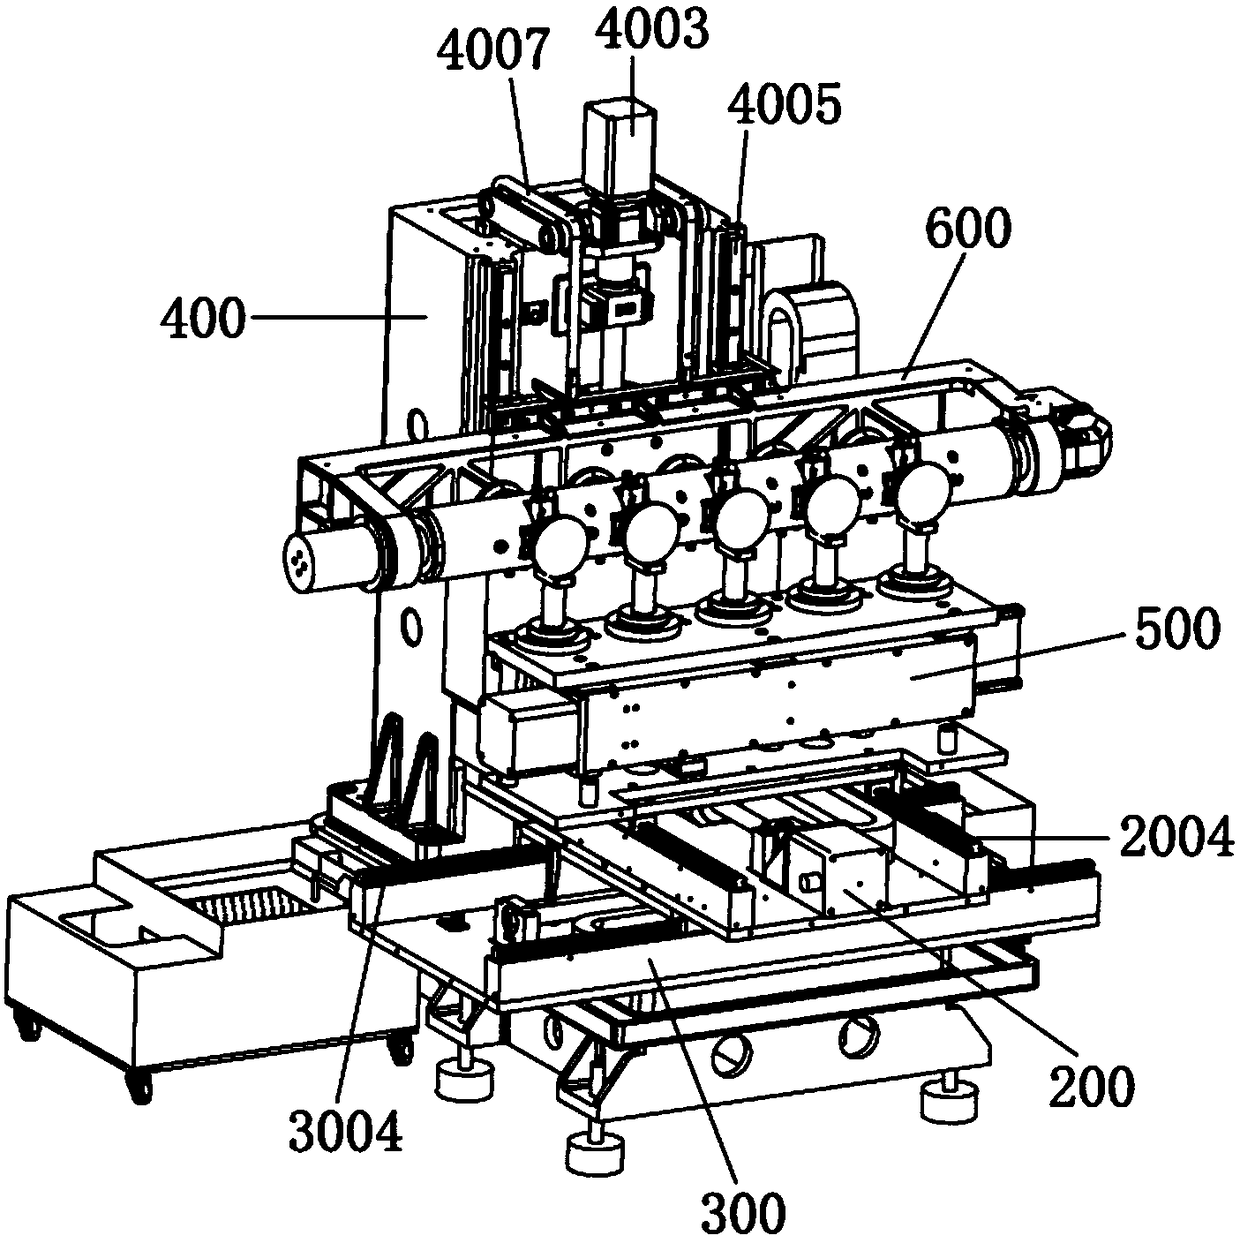 A multifunctional five-axis machine tool